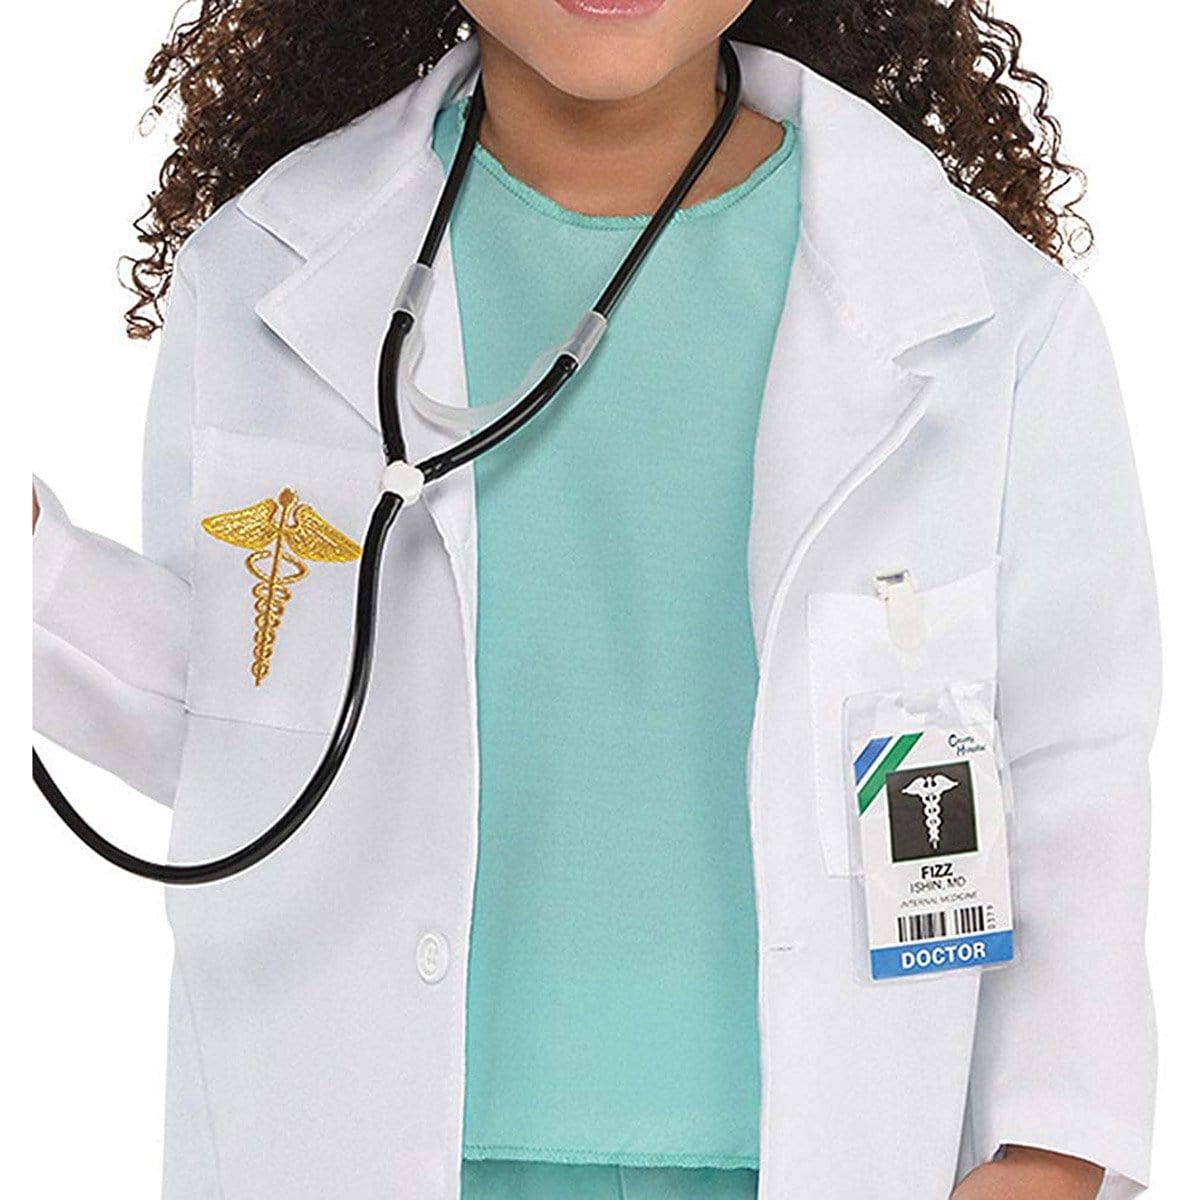 Buy Costumes Classic Doctor Costume for Kids sold at Party Expert